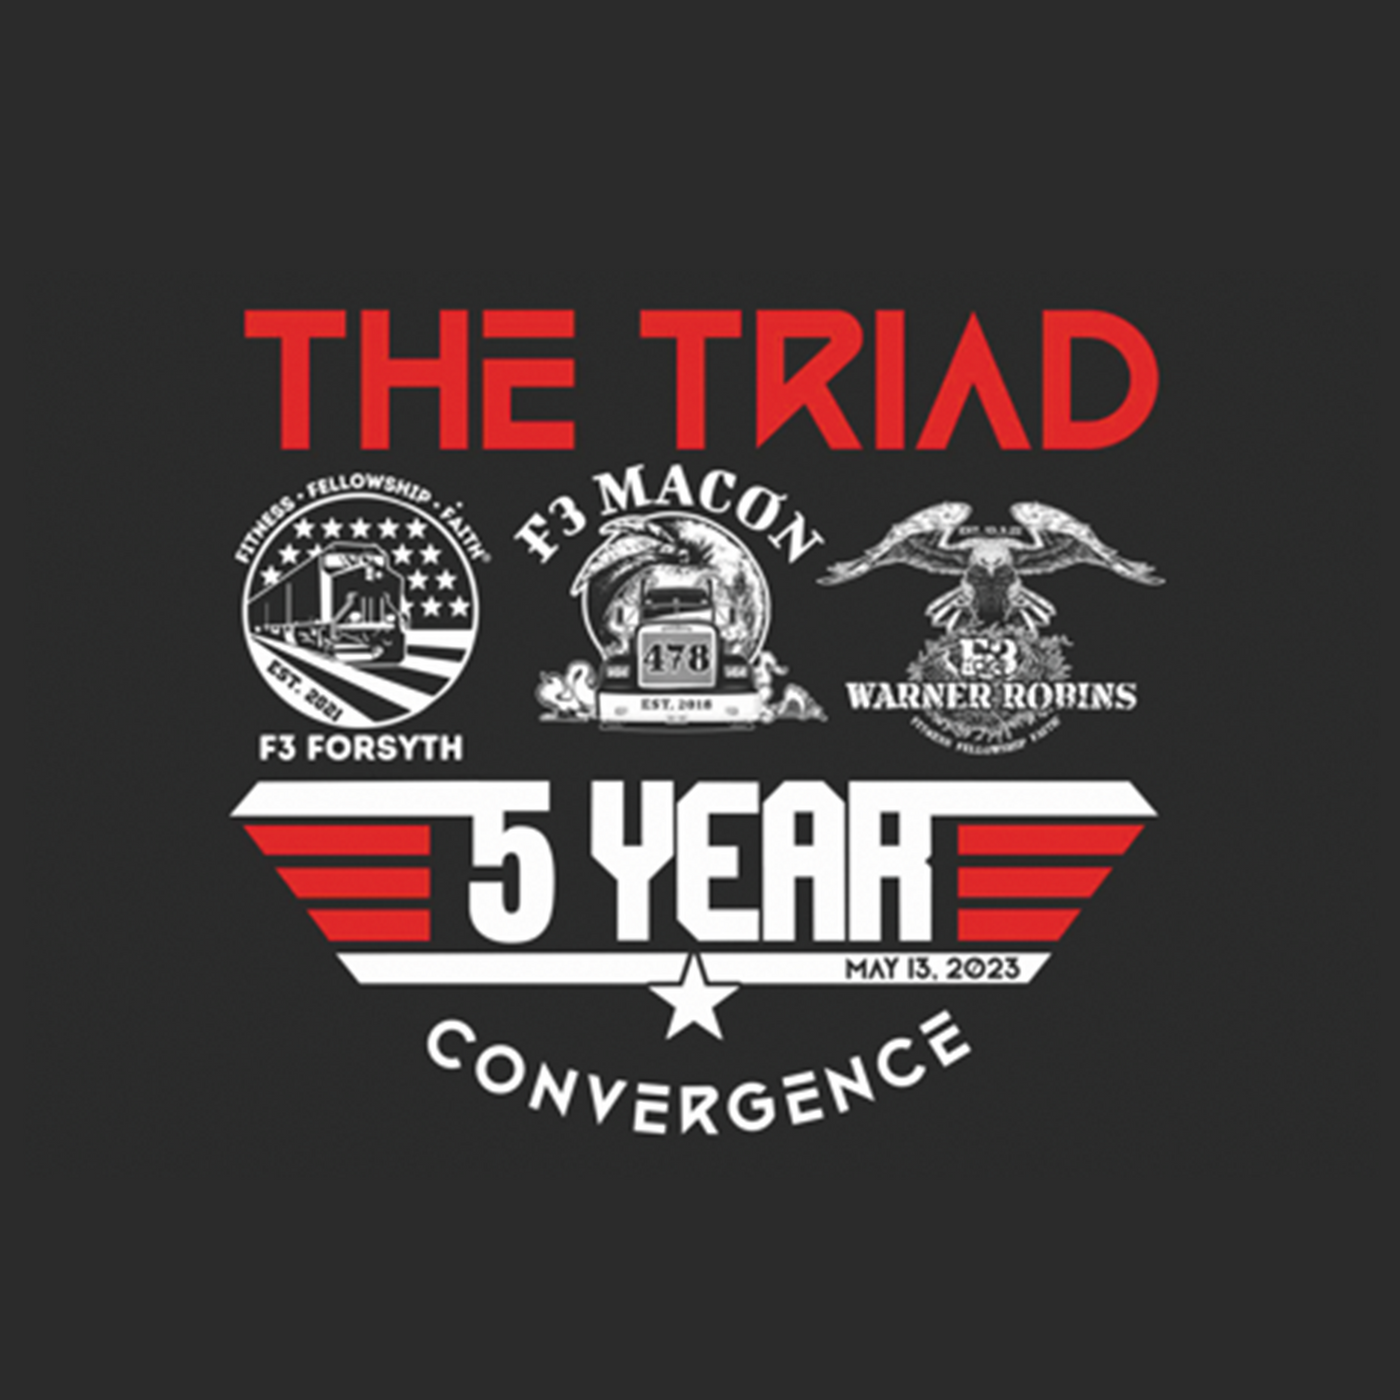 F3 Macon 5 Year Convergence Pre-Order June 2023